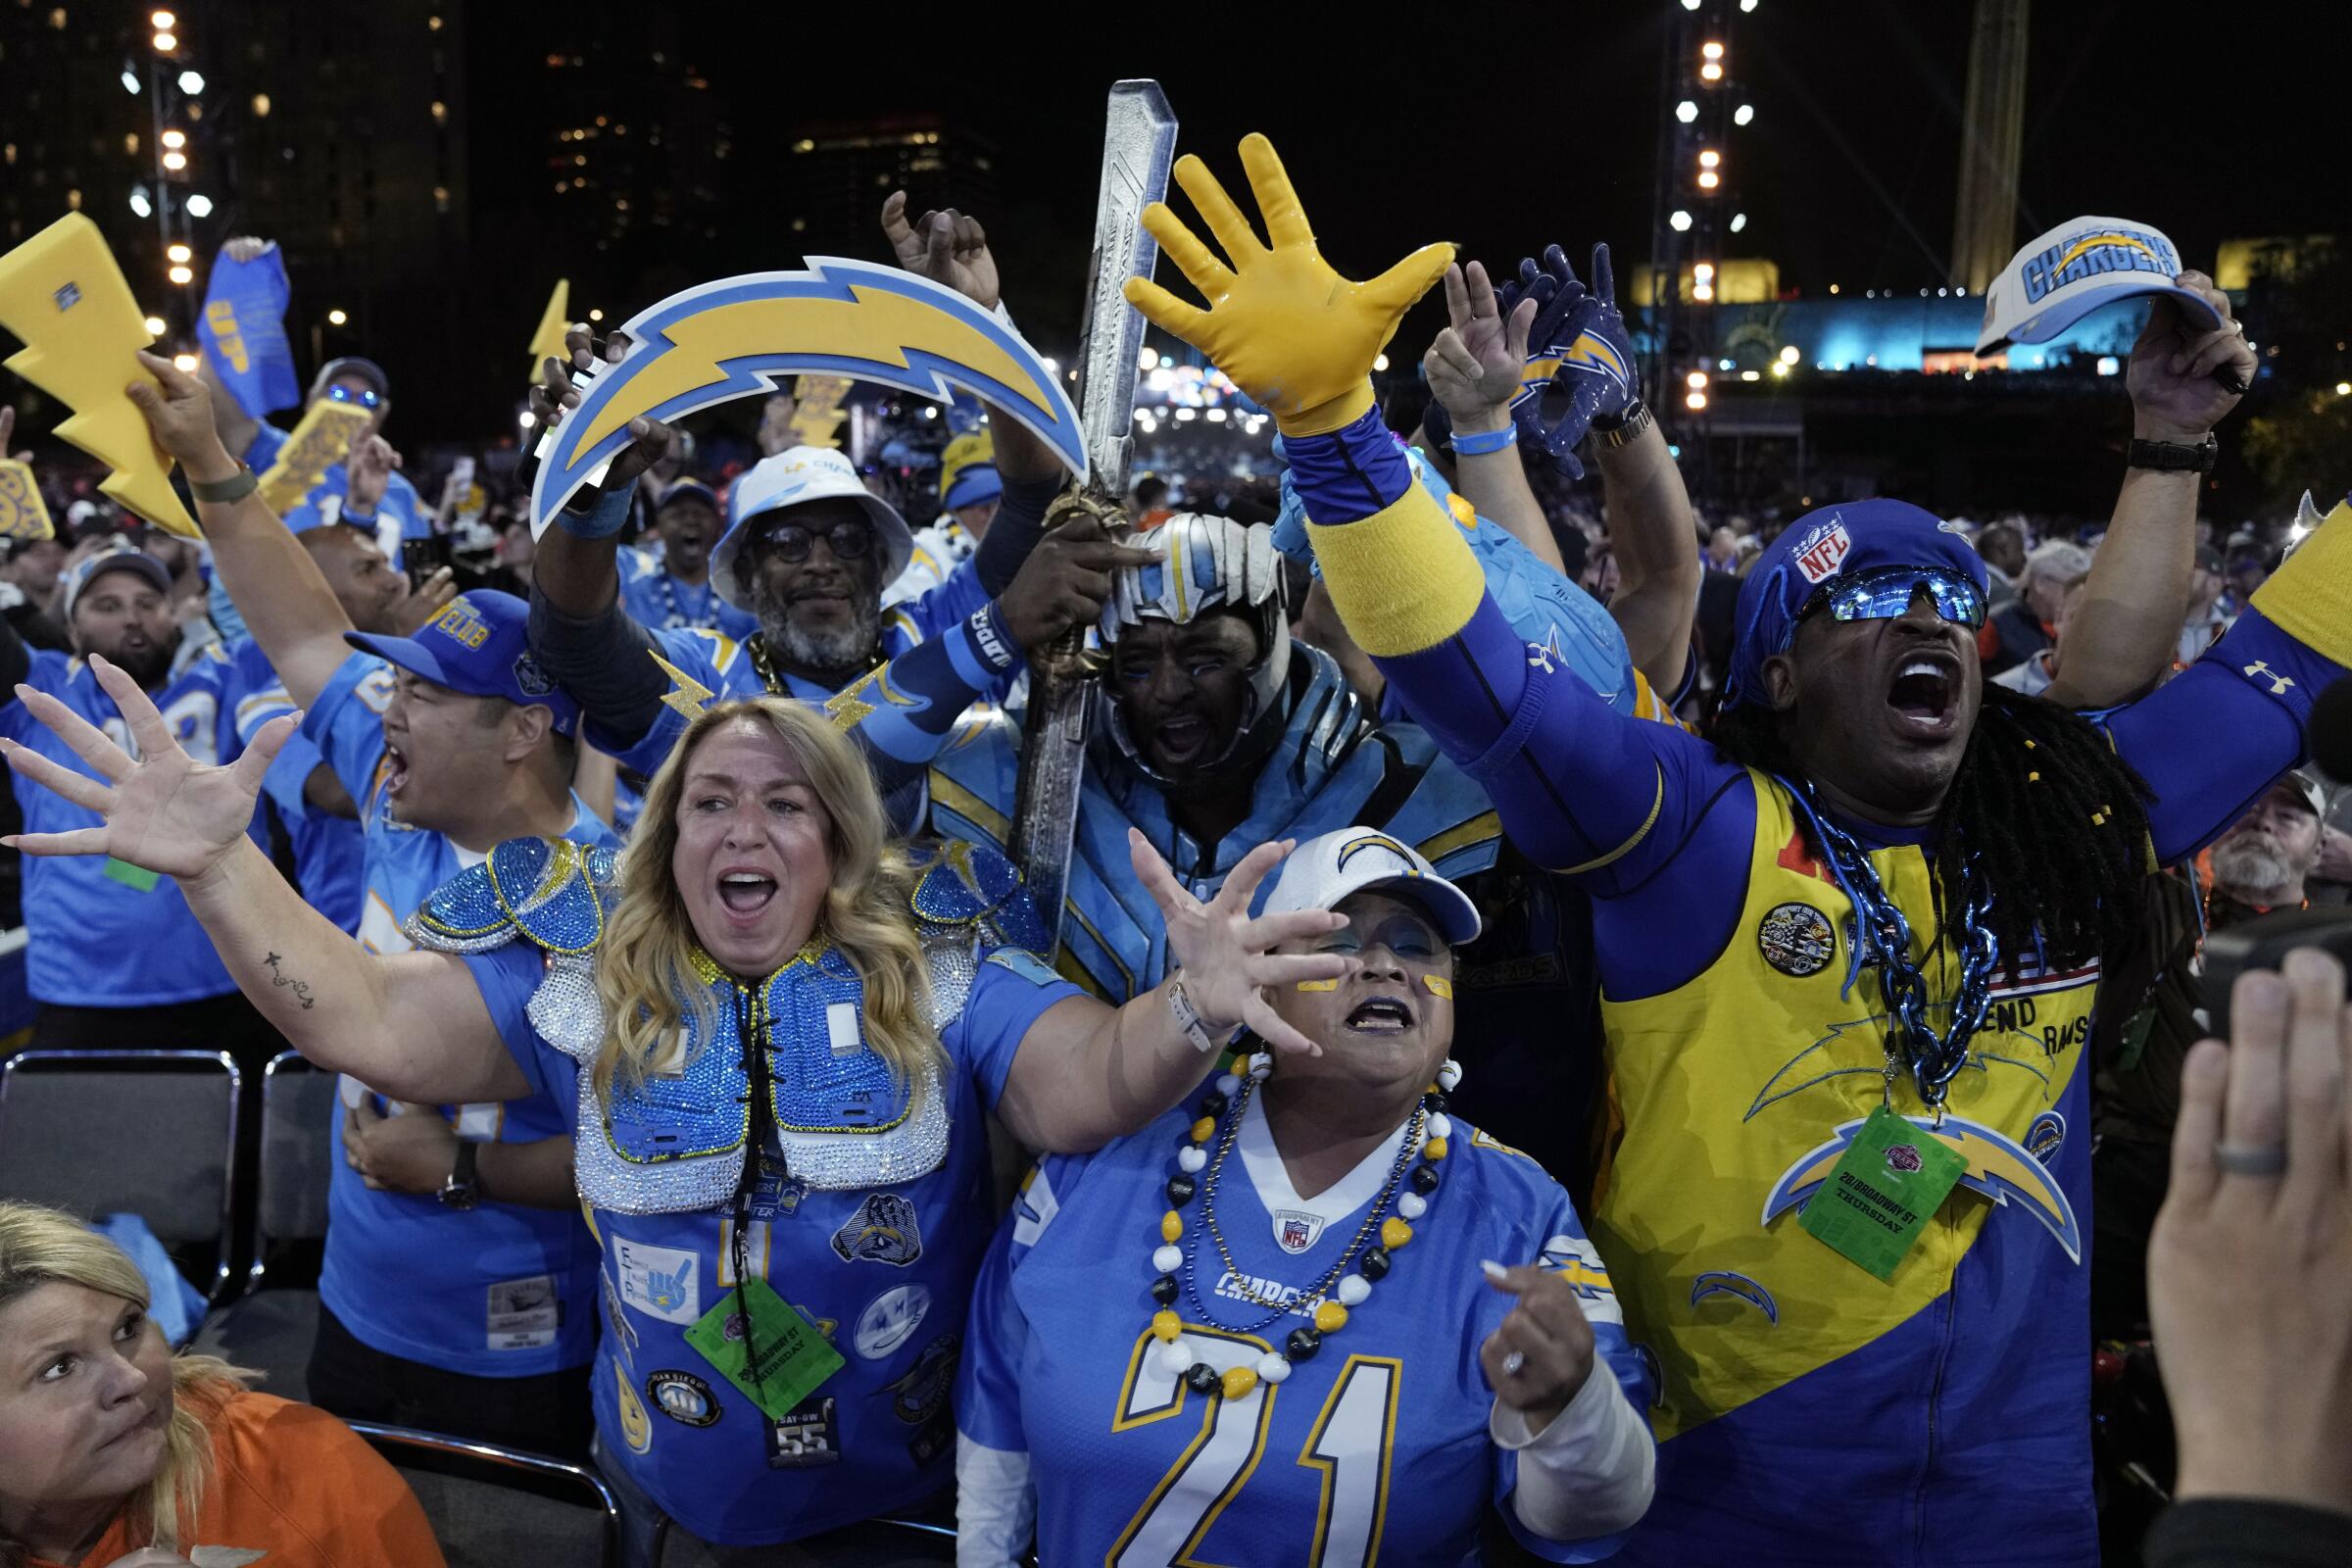 Chargers fans in Kansas City celebrate during the first round of the NFL draft on Thursday.